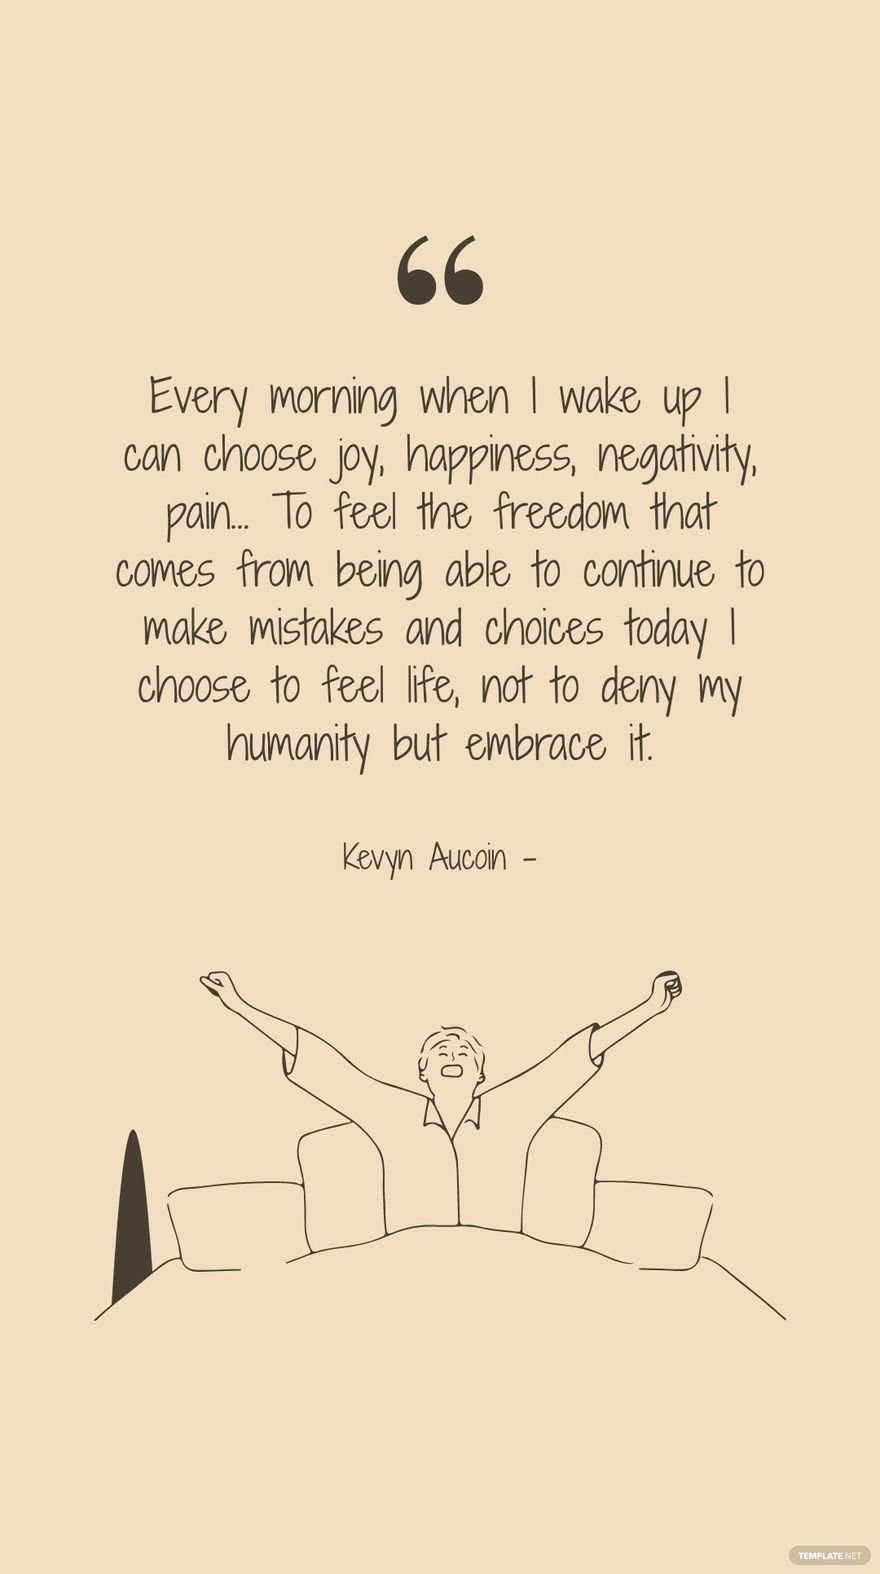 Kevyn Aucoin - Every morning when I wake up I can choose joy, happiness, negativity, pain… To feel the freedom that comes from being able to continue to make mistakes and choices today I choose to fee